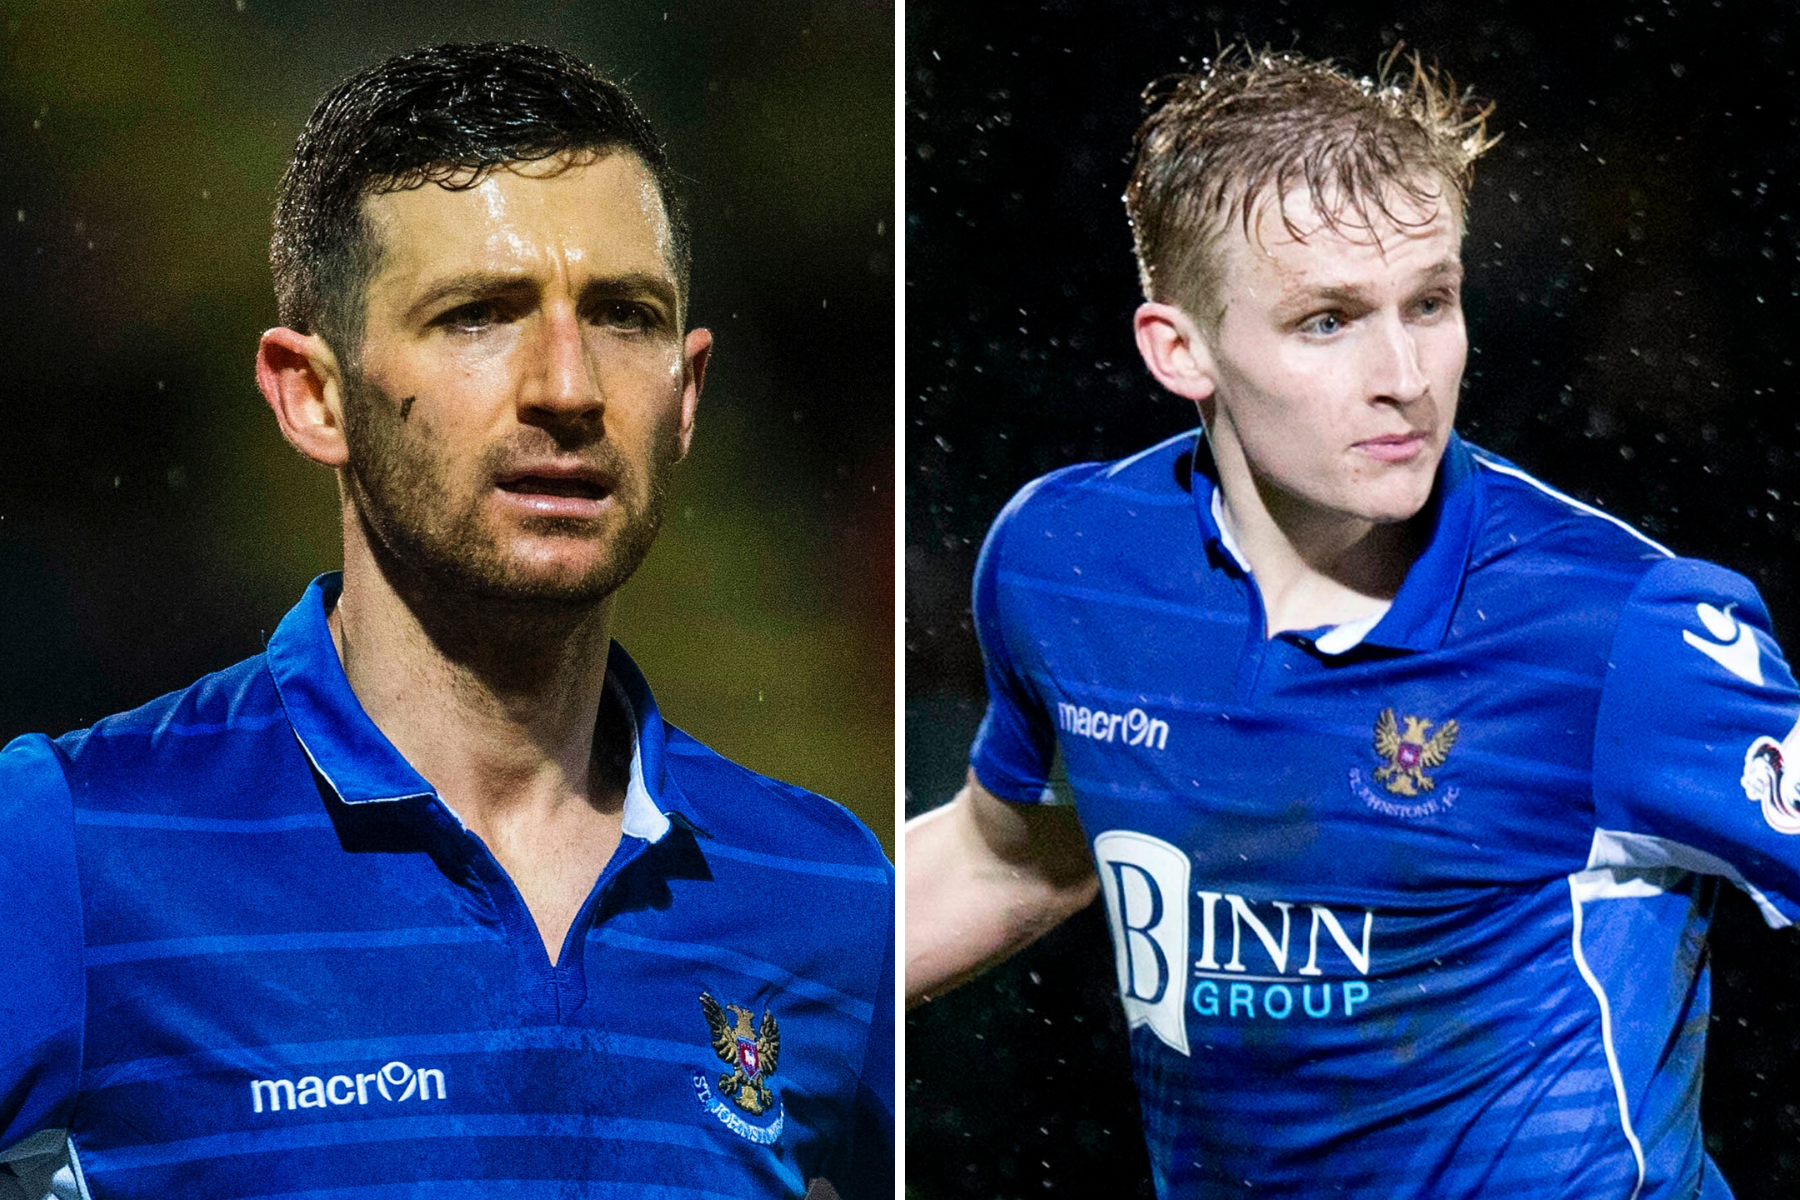 St Johnstone star Ali McCann is 'undroppable' and has a big future ahead, says Rangers loanee Jason Holt